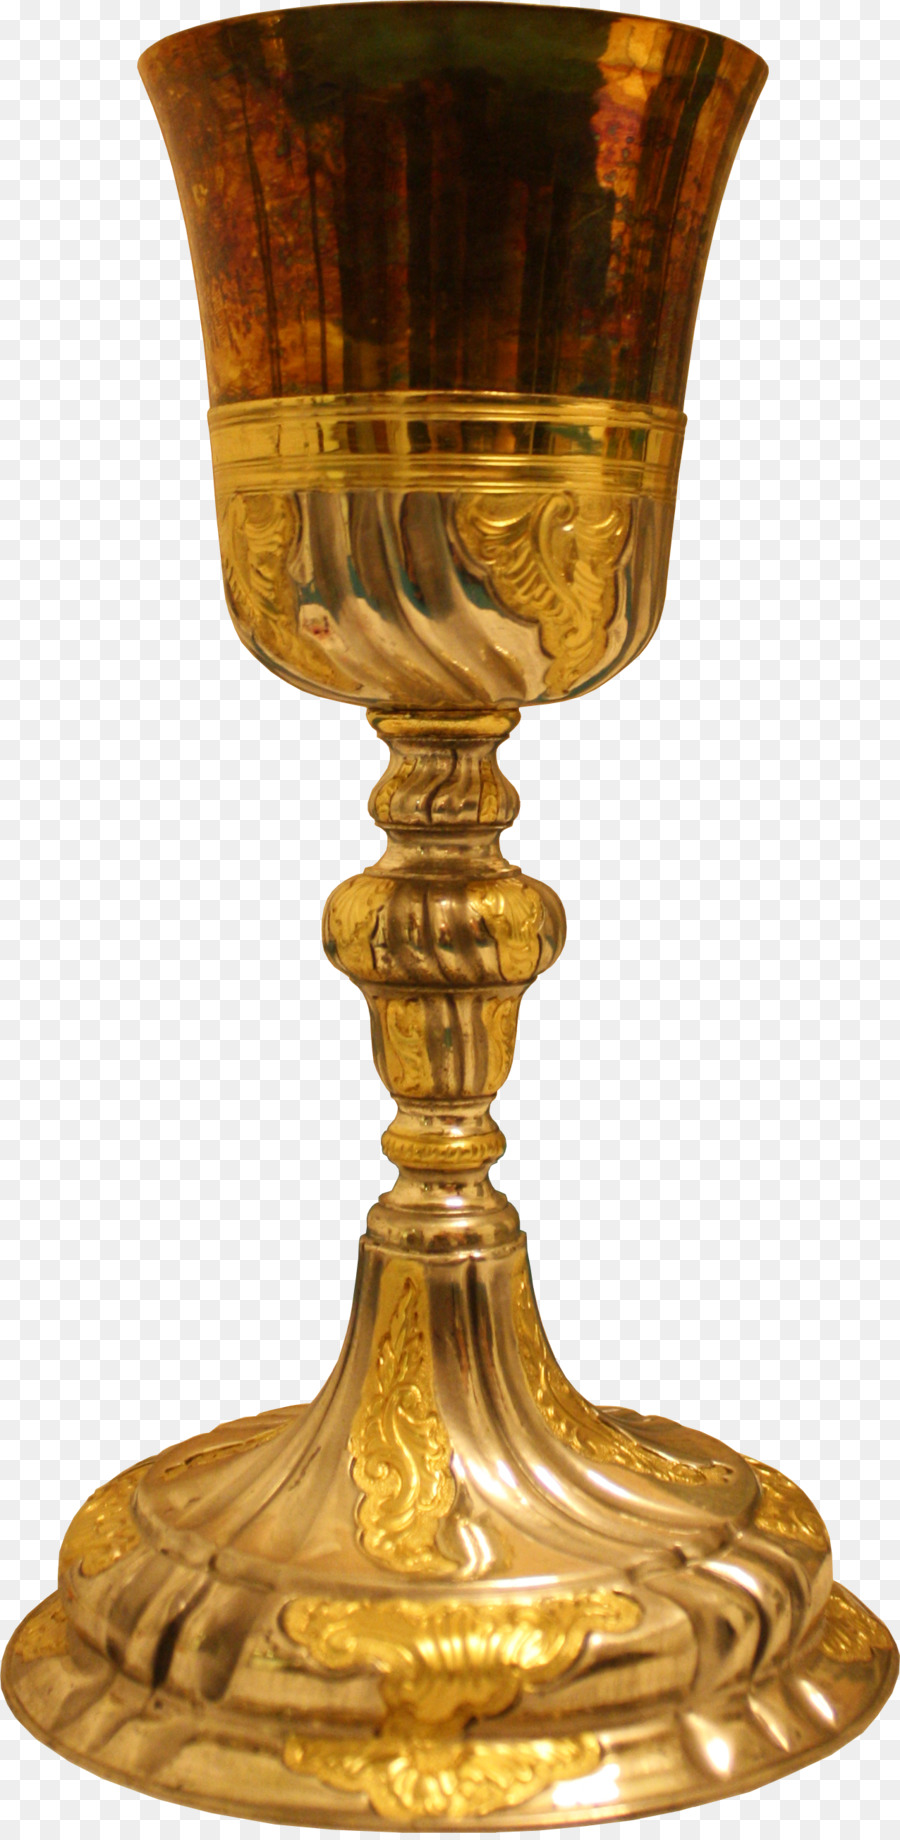 Transparent png eucharist . Chalice clipart holy grail